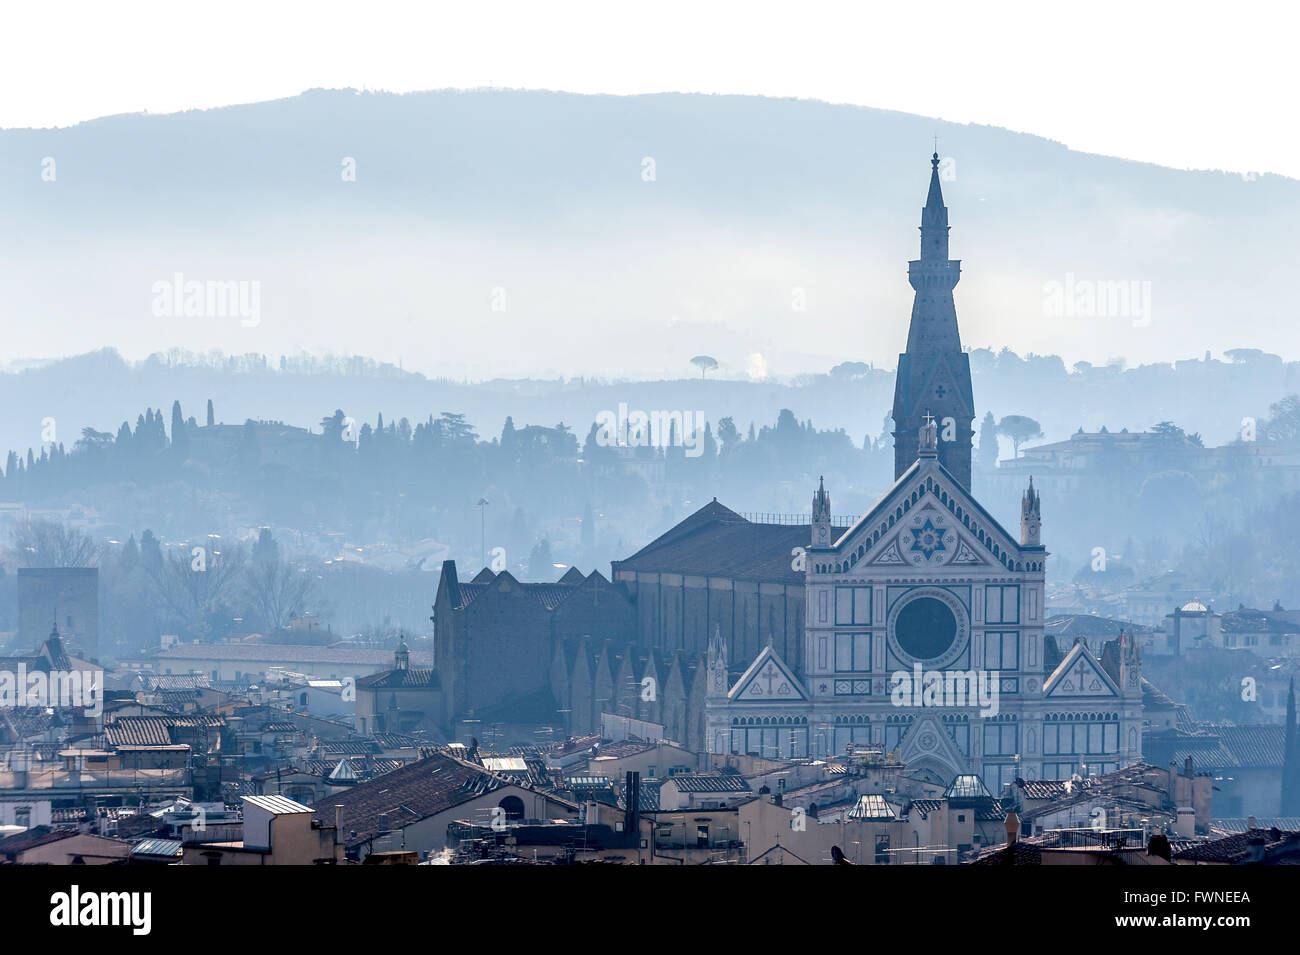 The Basilica of Santa Croce in Florence, Italy. Stock Photo